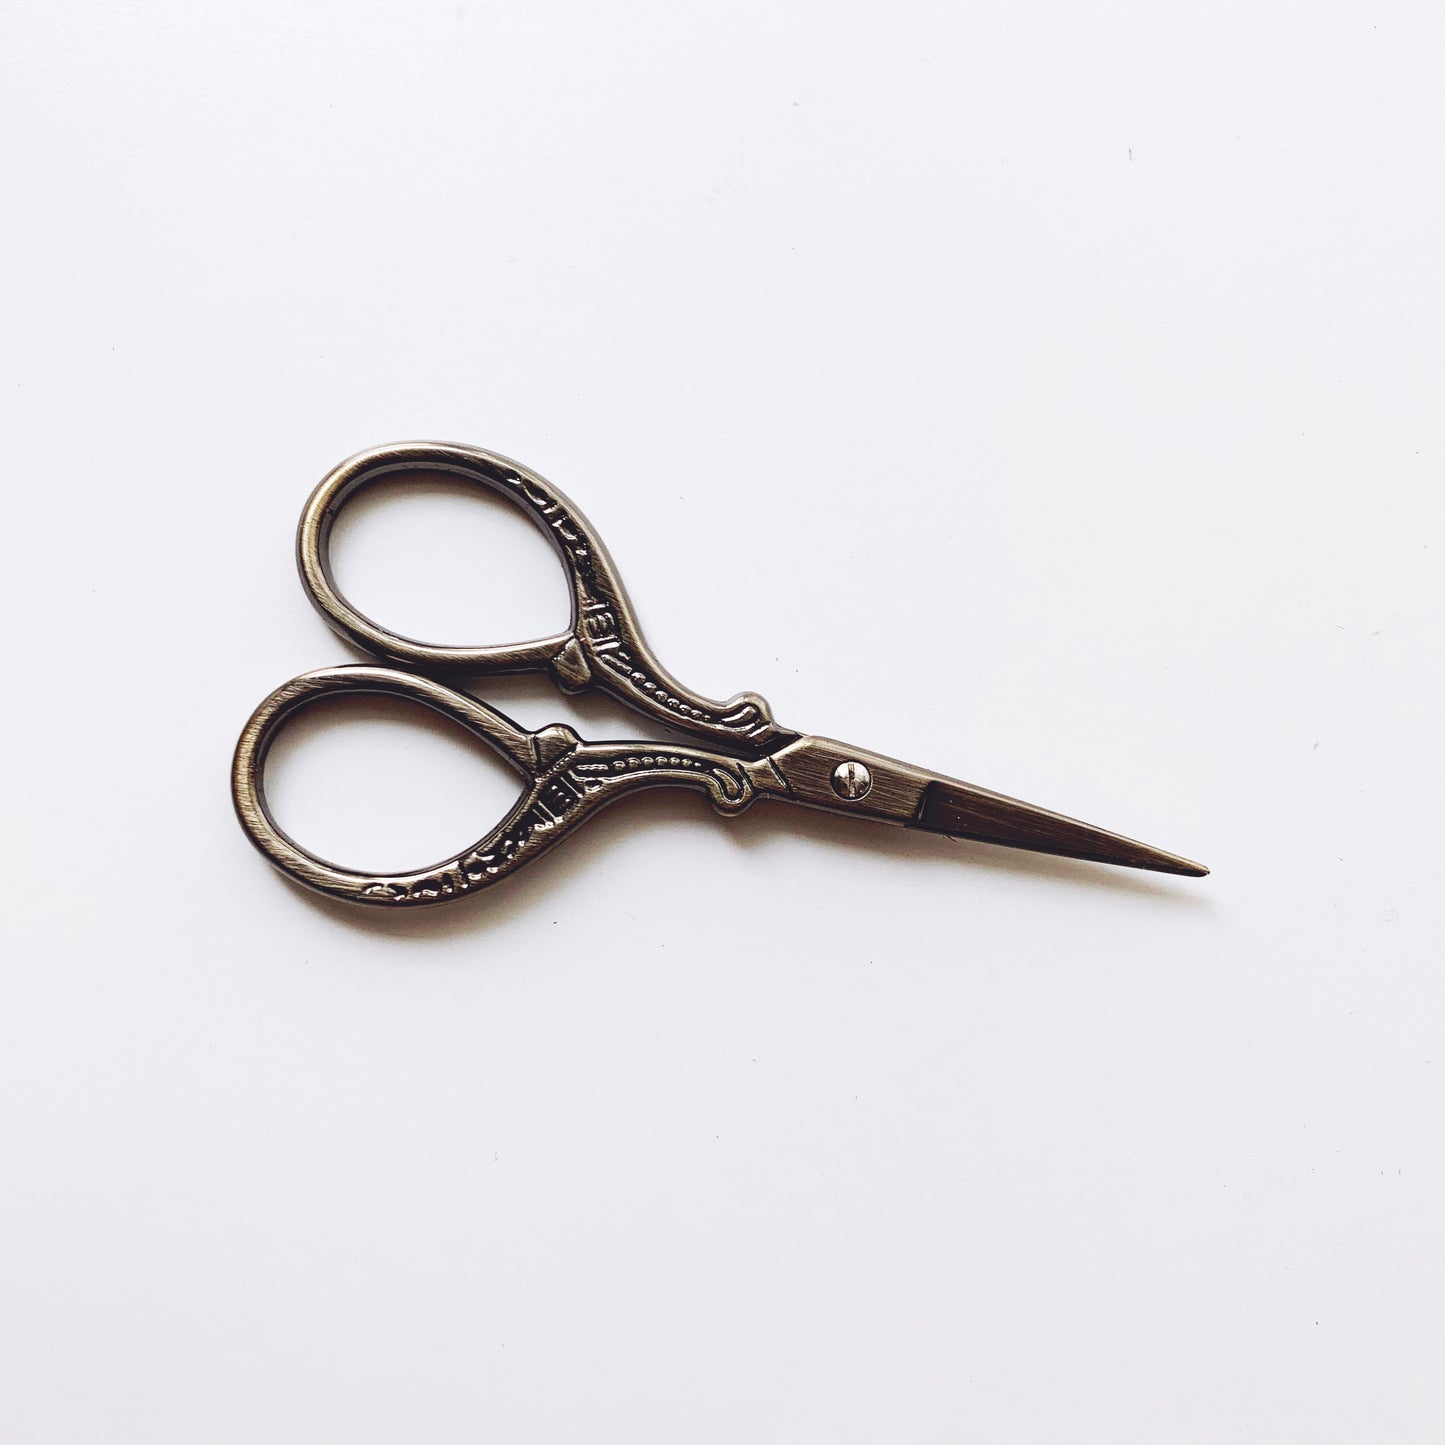 Leyah Antique Style Antiqued Dark Gold Stainless Steel Embroidery Scissors